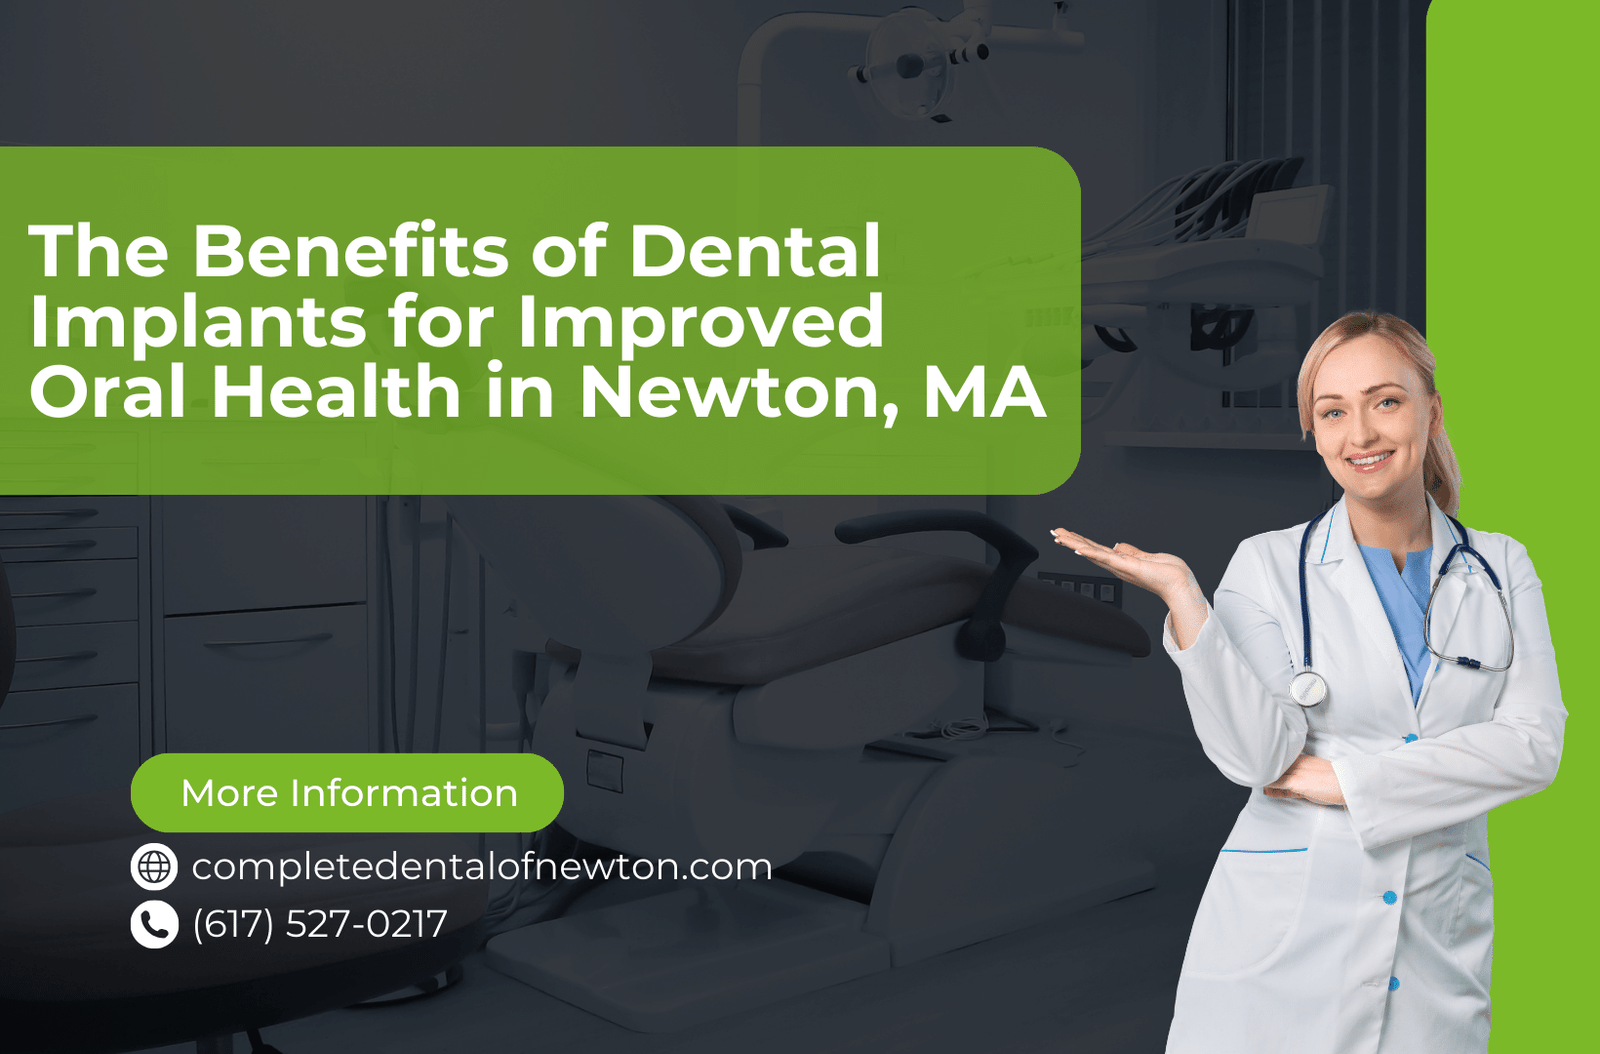 The Benefits of Dental Implants for Improved Oral Health in Newton, MA